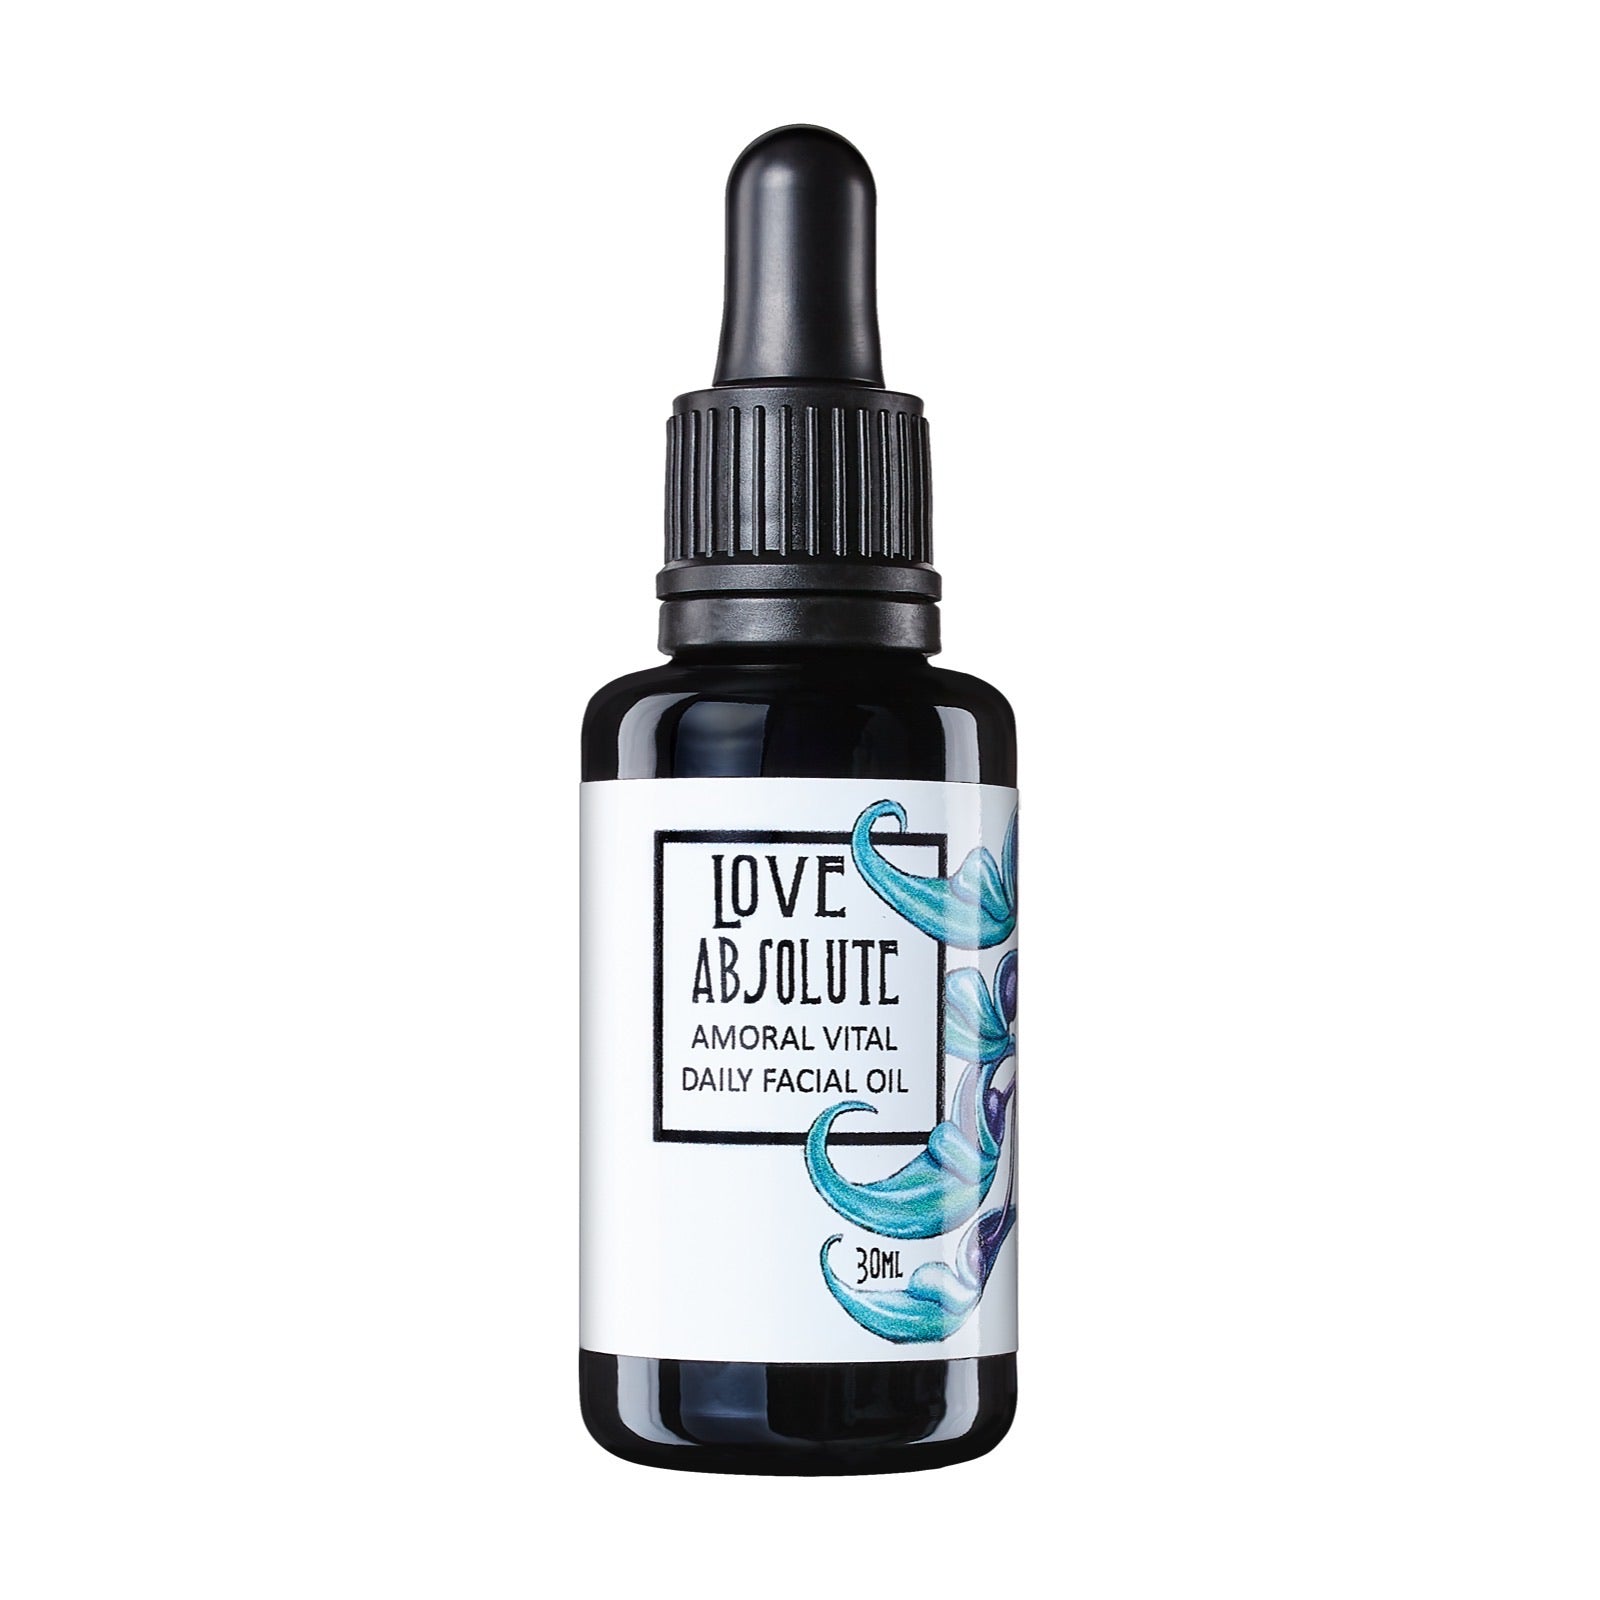 Amoral Vital Daily Facial Oil - Love Absolute